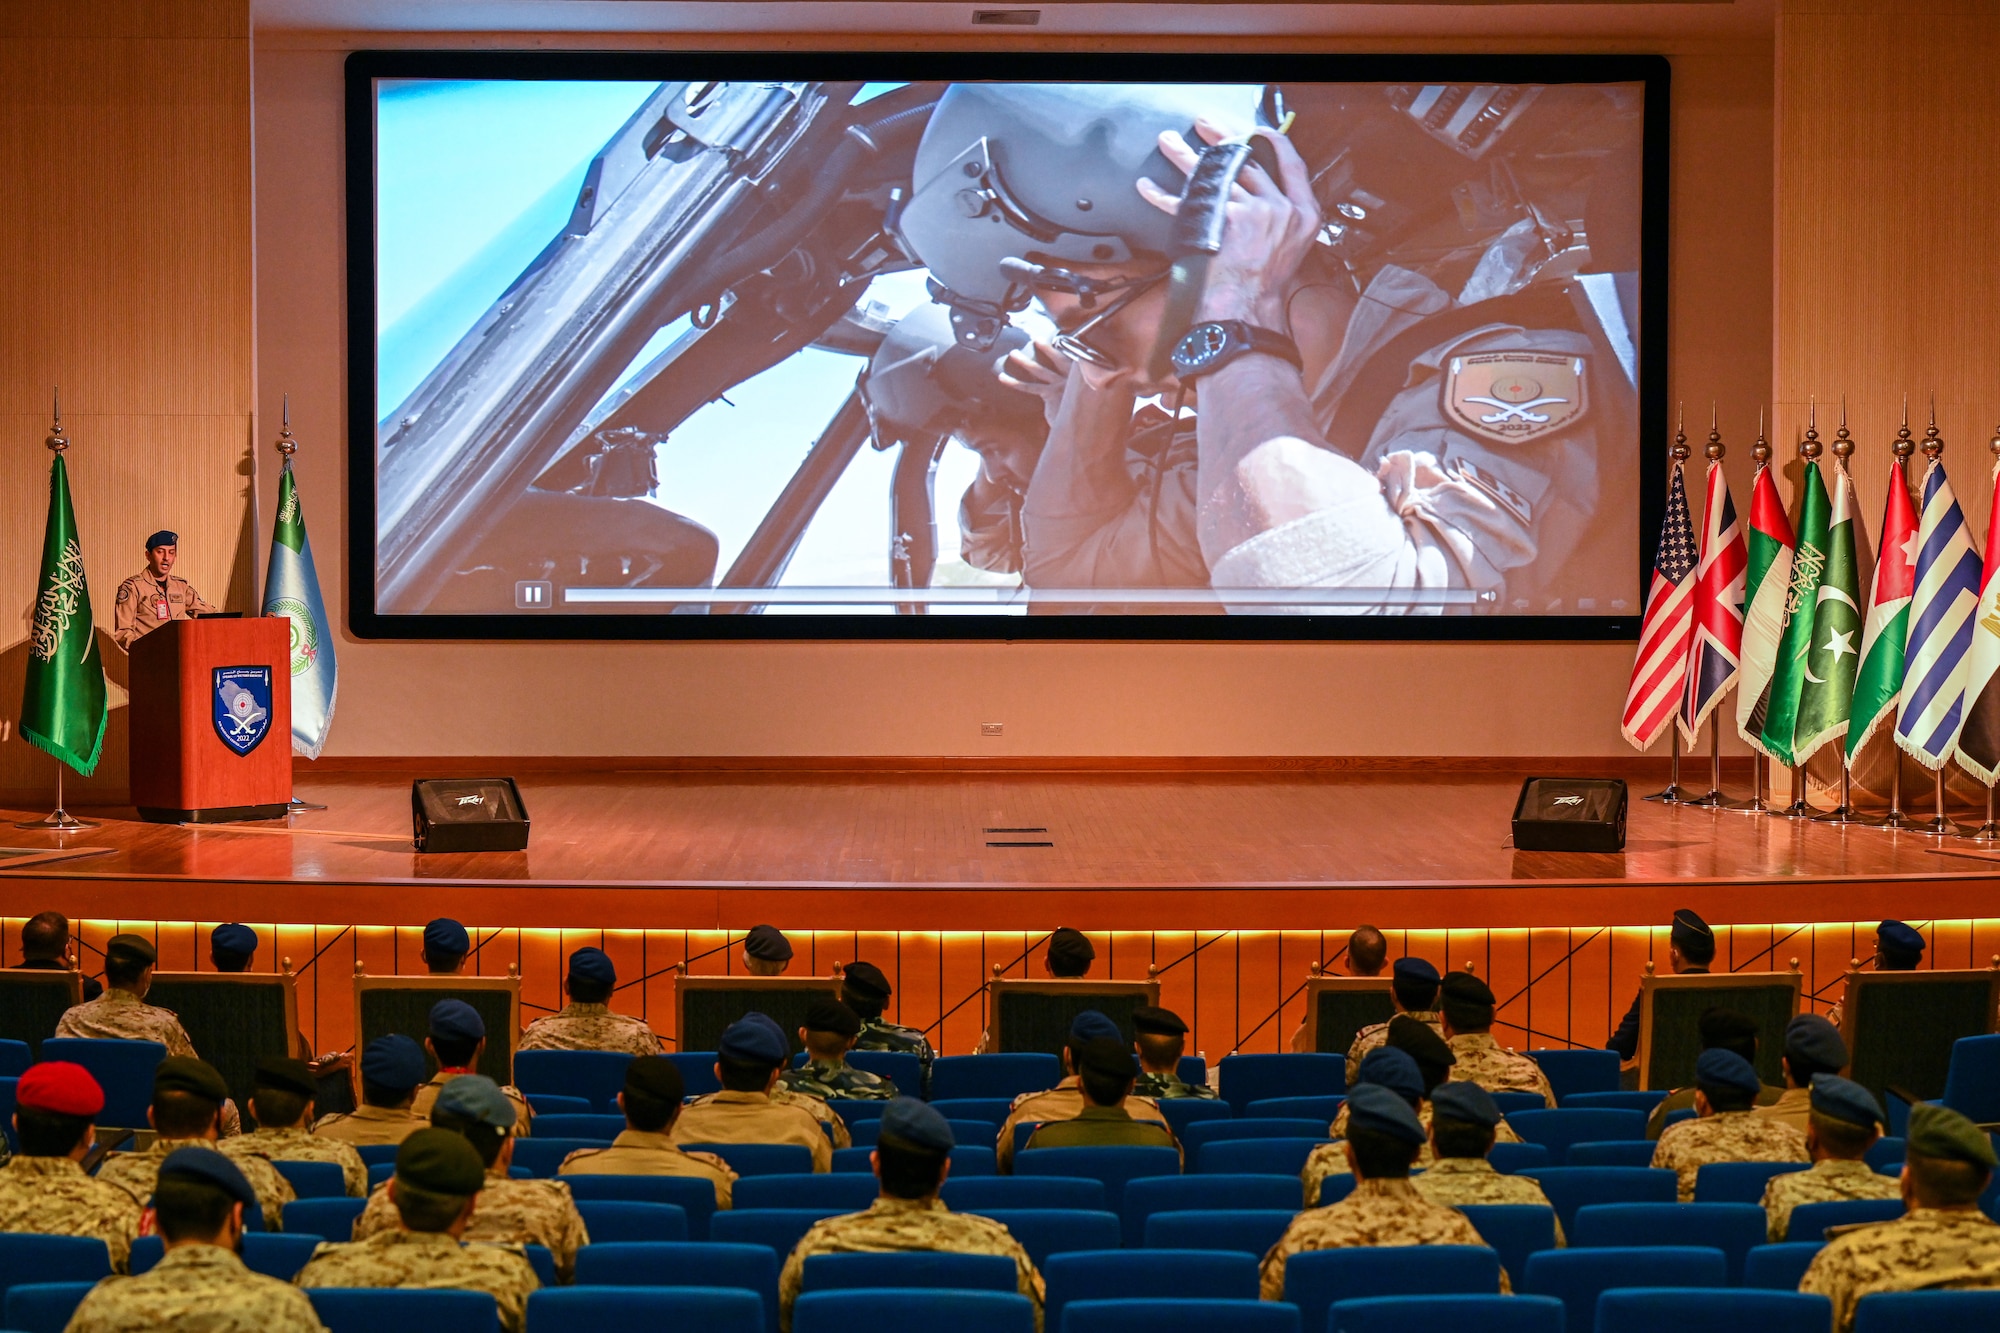 Members of the multinational RSAF led exercise, Spears of Victory attend a briefing at King Abdulaziz Air Base, Kingdom of Saudi Arabia, Feb. 17, 2022. Training with partner nations strengthens military-to-military relationships, improves interoperability and promotes regional stability. (U.S. Air Force photo by Staff Sgt. Christina A. Graves)